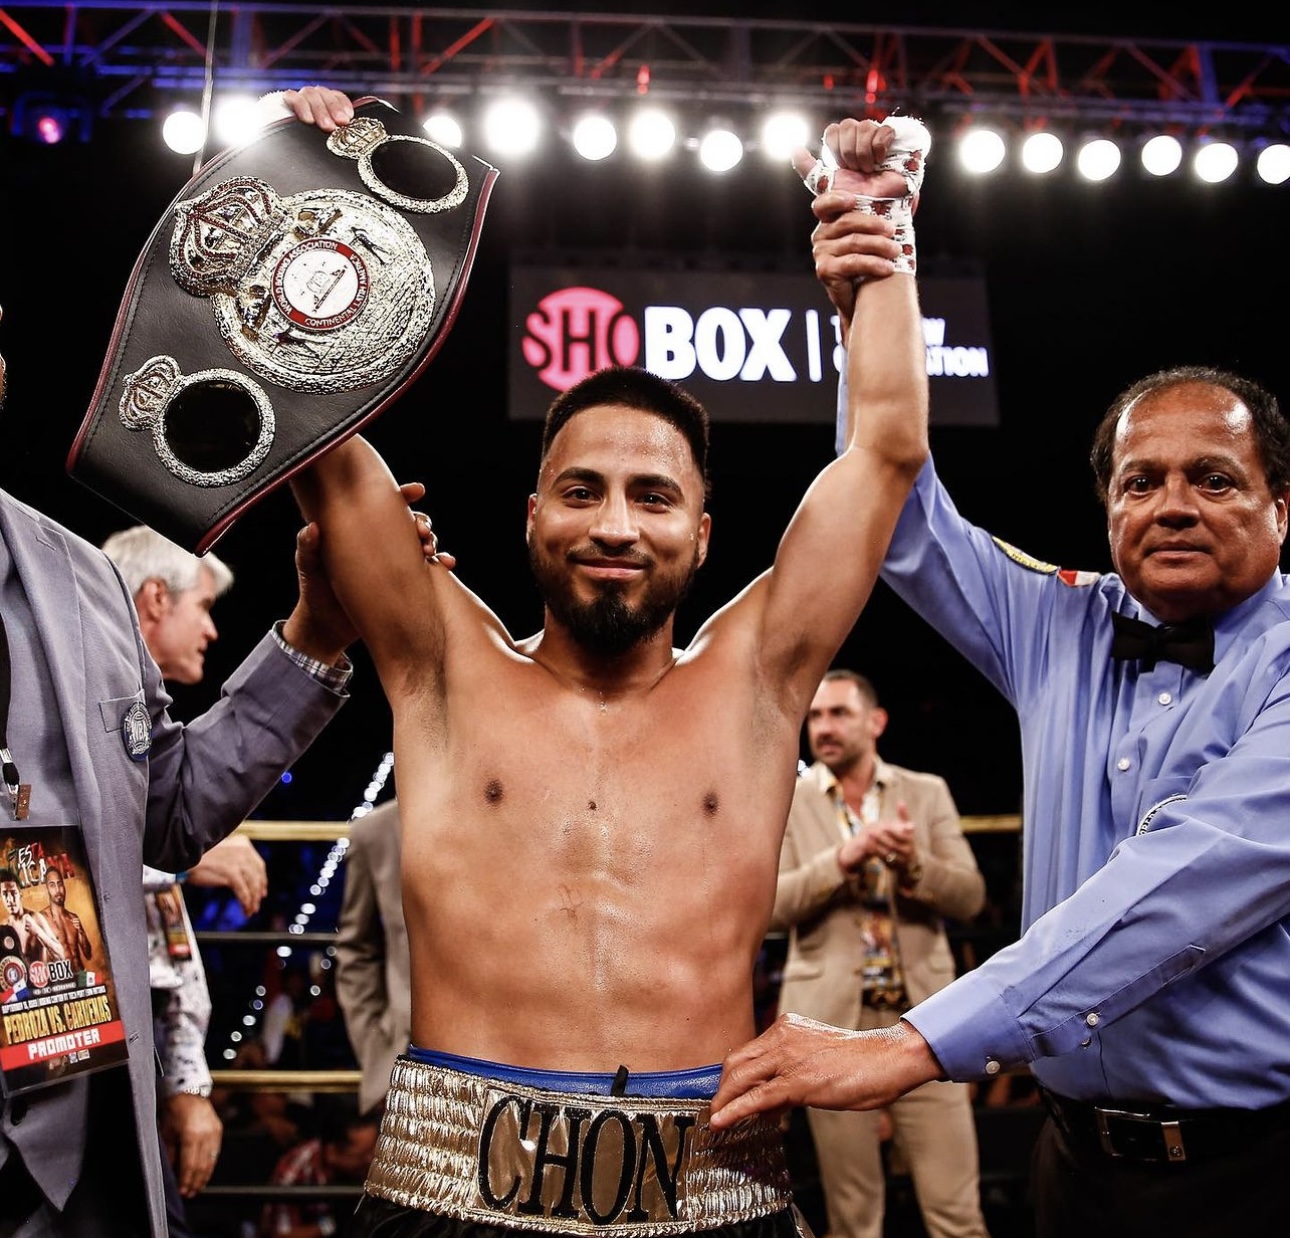 Cardenas knocked out Pedroza and is new WBA Continental Latin America champion 